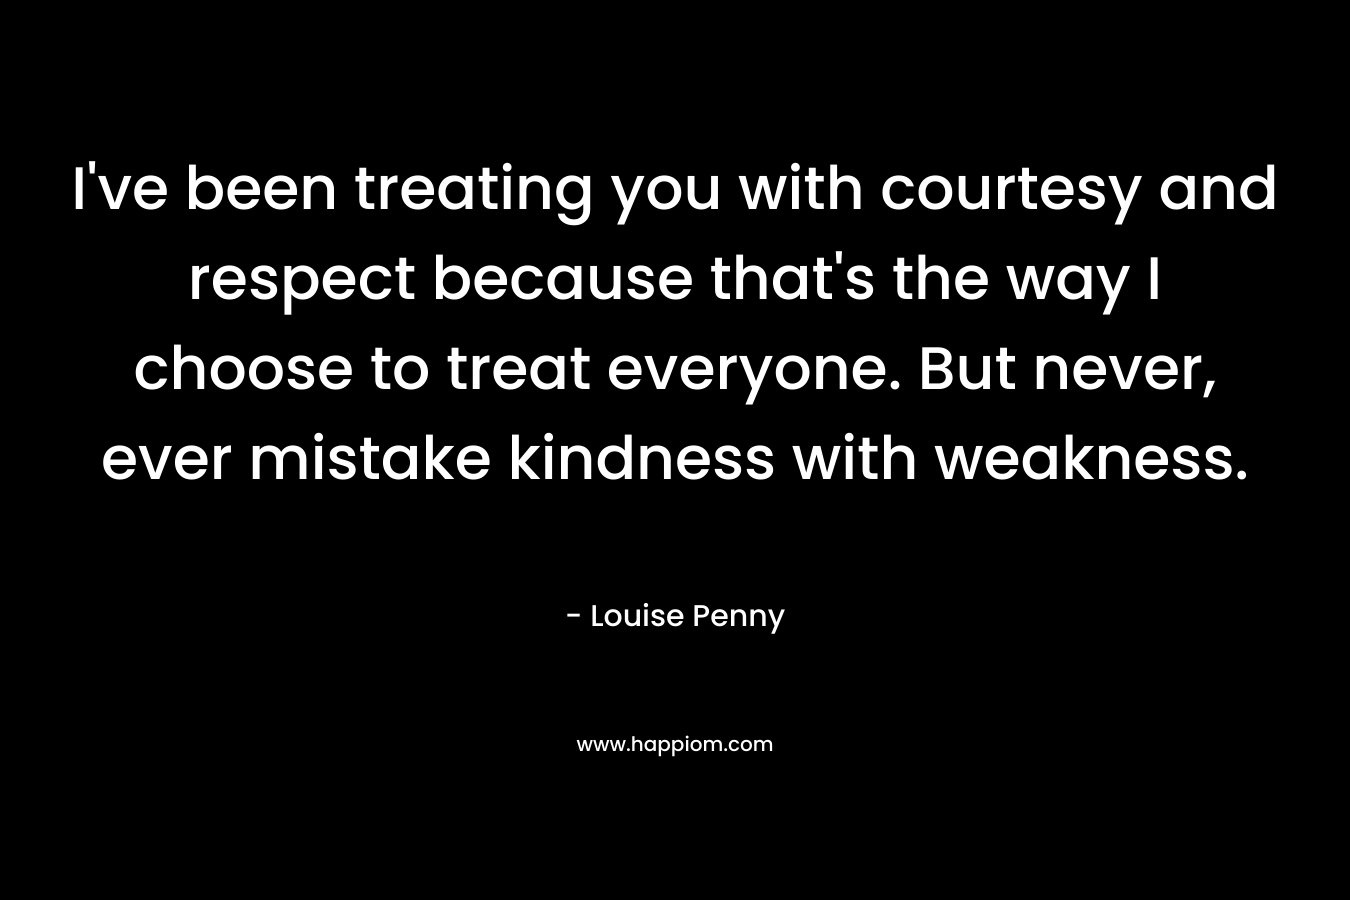 I've been treating you with courtesy and respect because that's the way I choose to treat everyone. But never, ever mistake kindness with weakness.